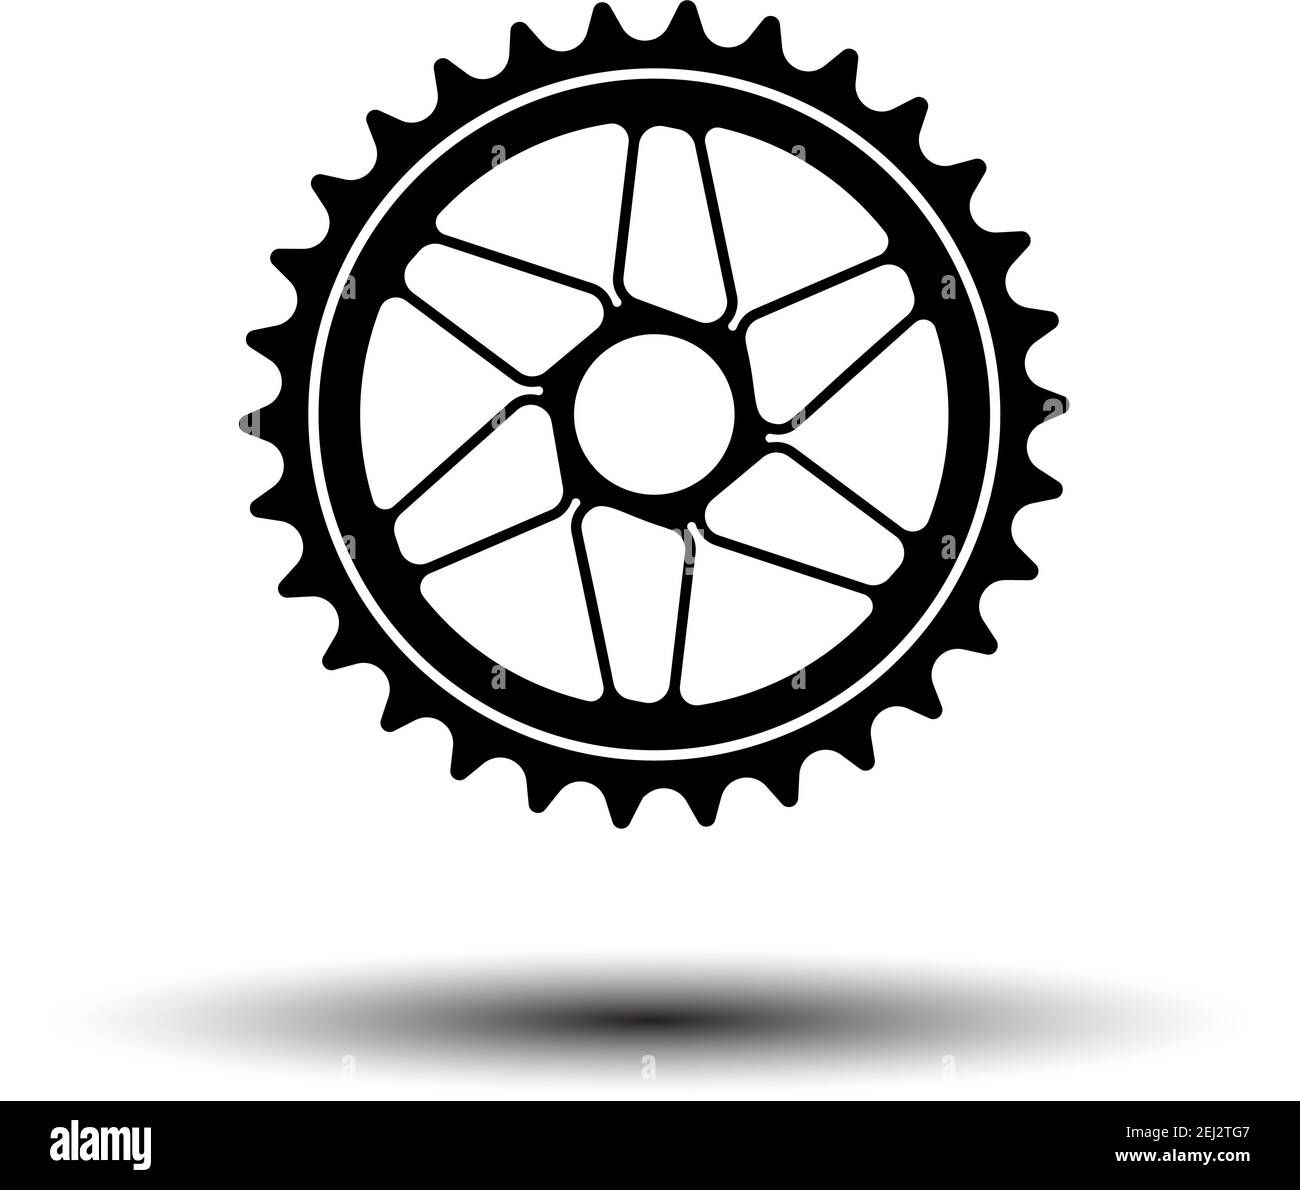 Bike Gear Star Icon. Black on White Background With Shadow. Vector Illustration. Stock Vector